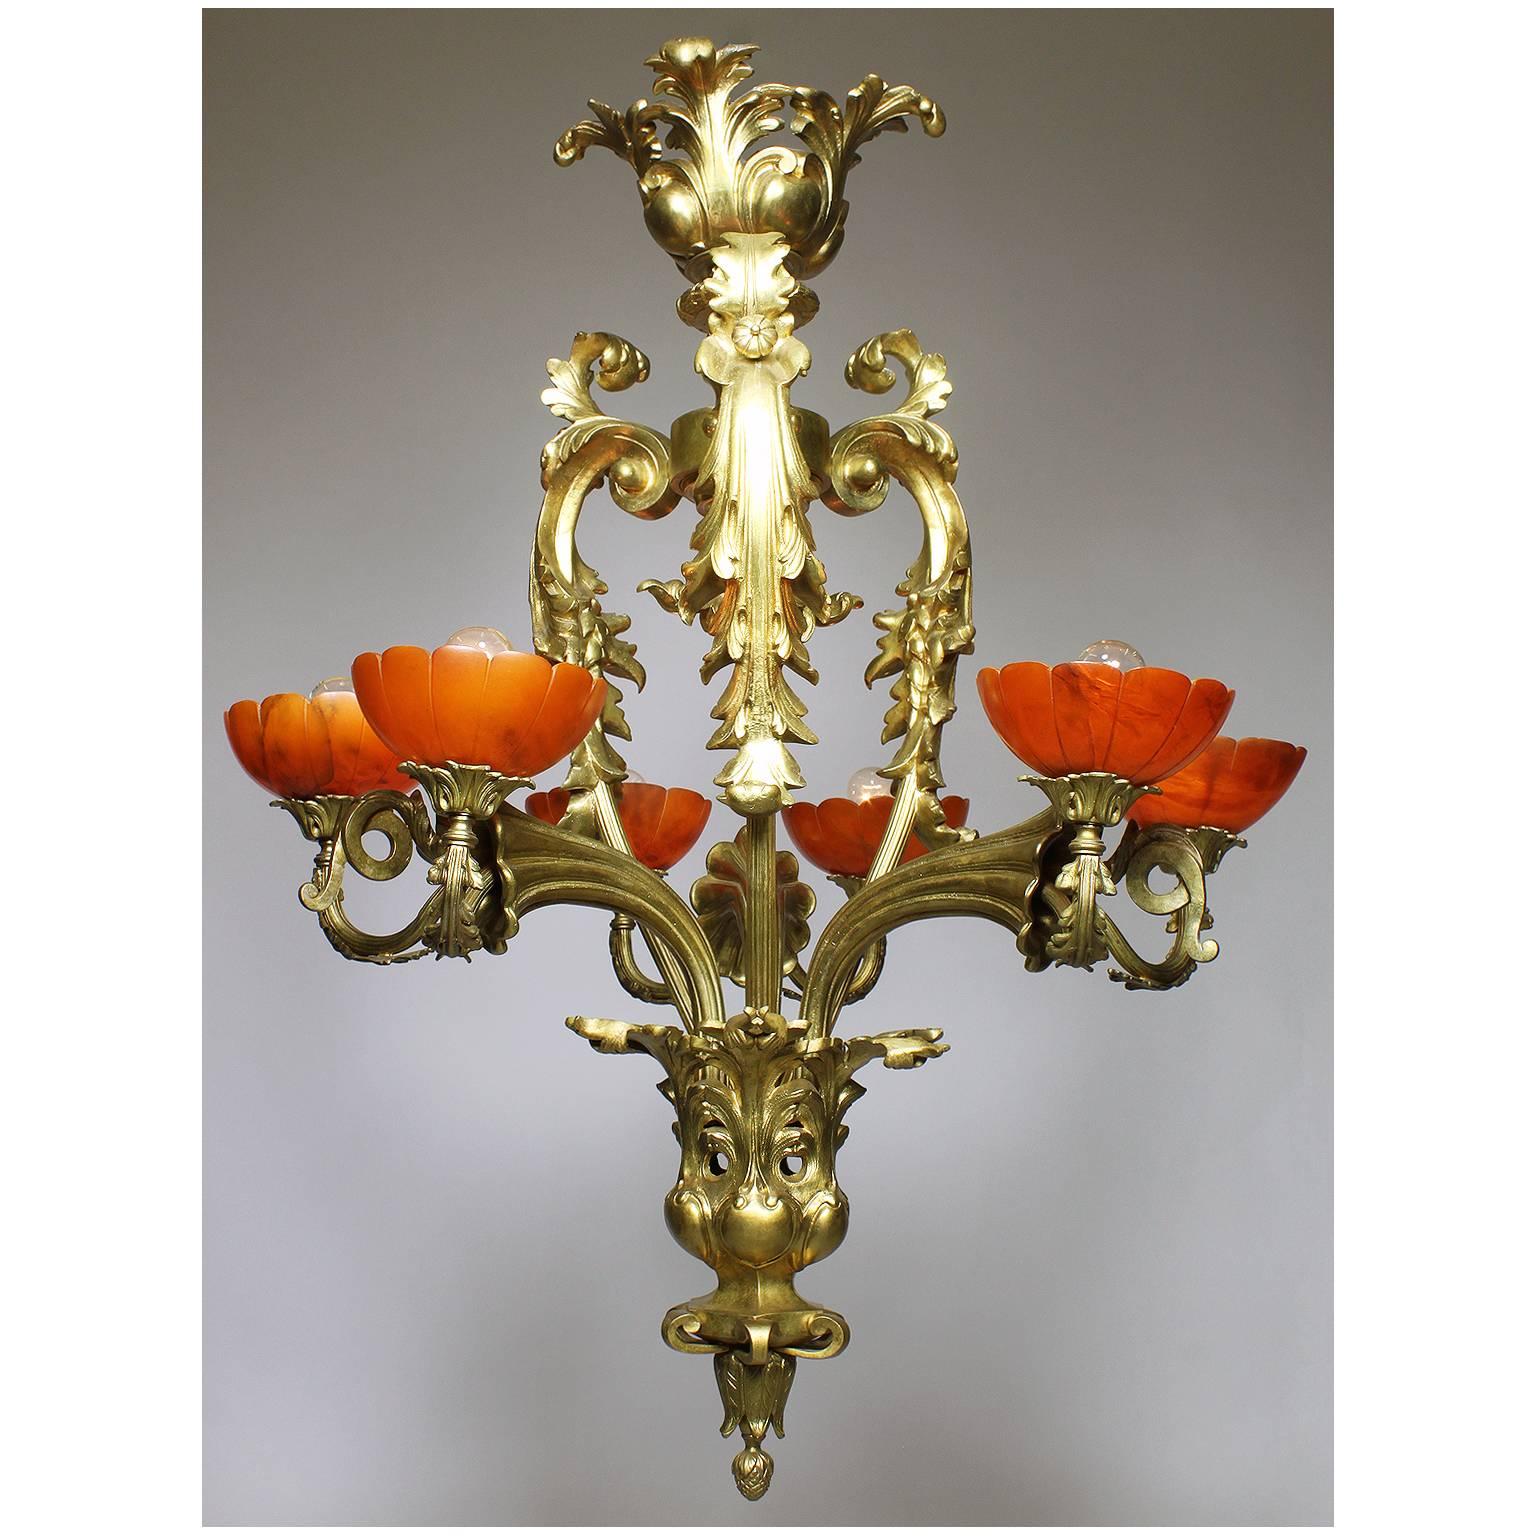 A fine and rare French Belle Époque early 20th century six-light gilt-bronze chandelier with ruby color carved alabaster shades. The scrolled gilt-bronze frame in the shape of a floral bouquet, with three cornucopia open lilies, each surmounted with